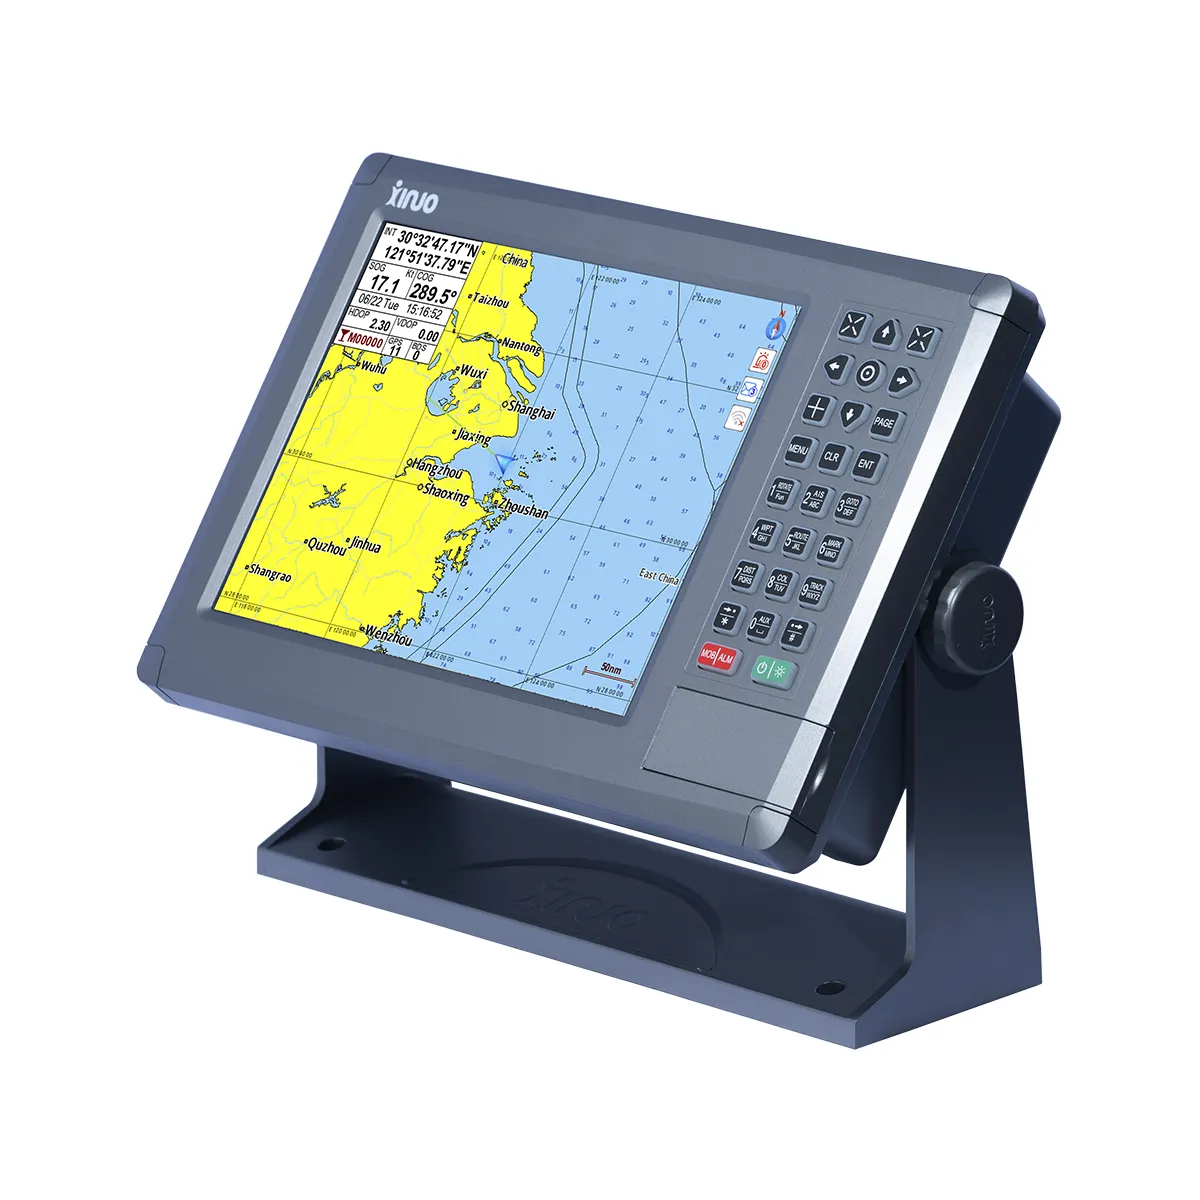 Marine navigator GPS chart plotter chartplotter XINUO GN-150 series GN-1510 10 inch small size display CE IMO CCS NMEA0183 IP65